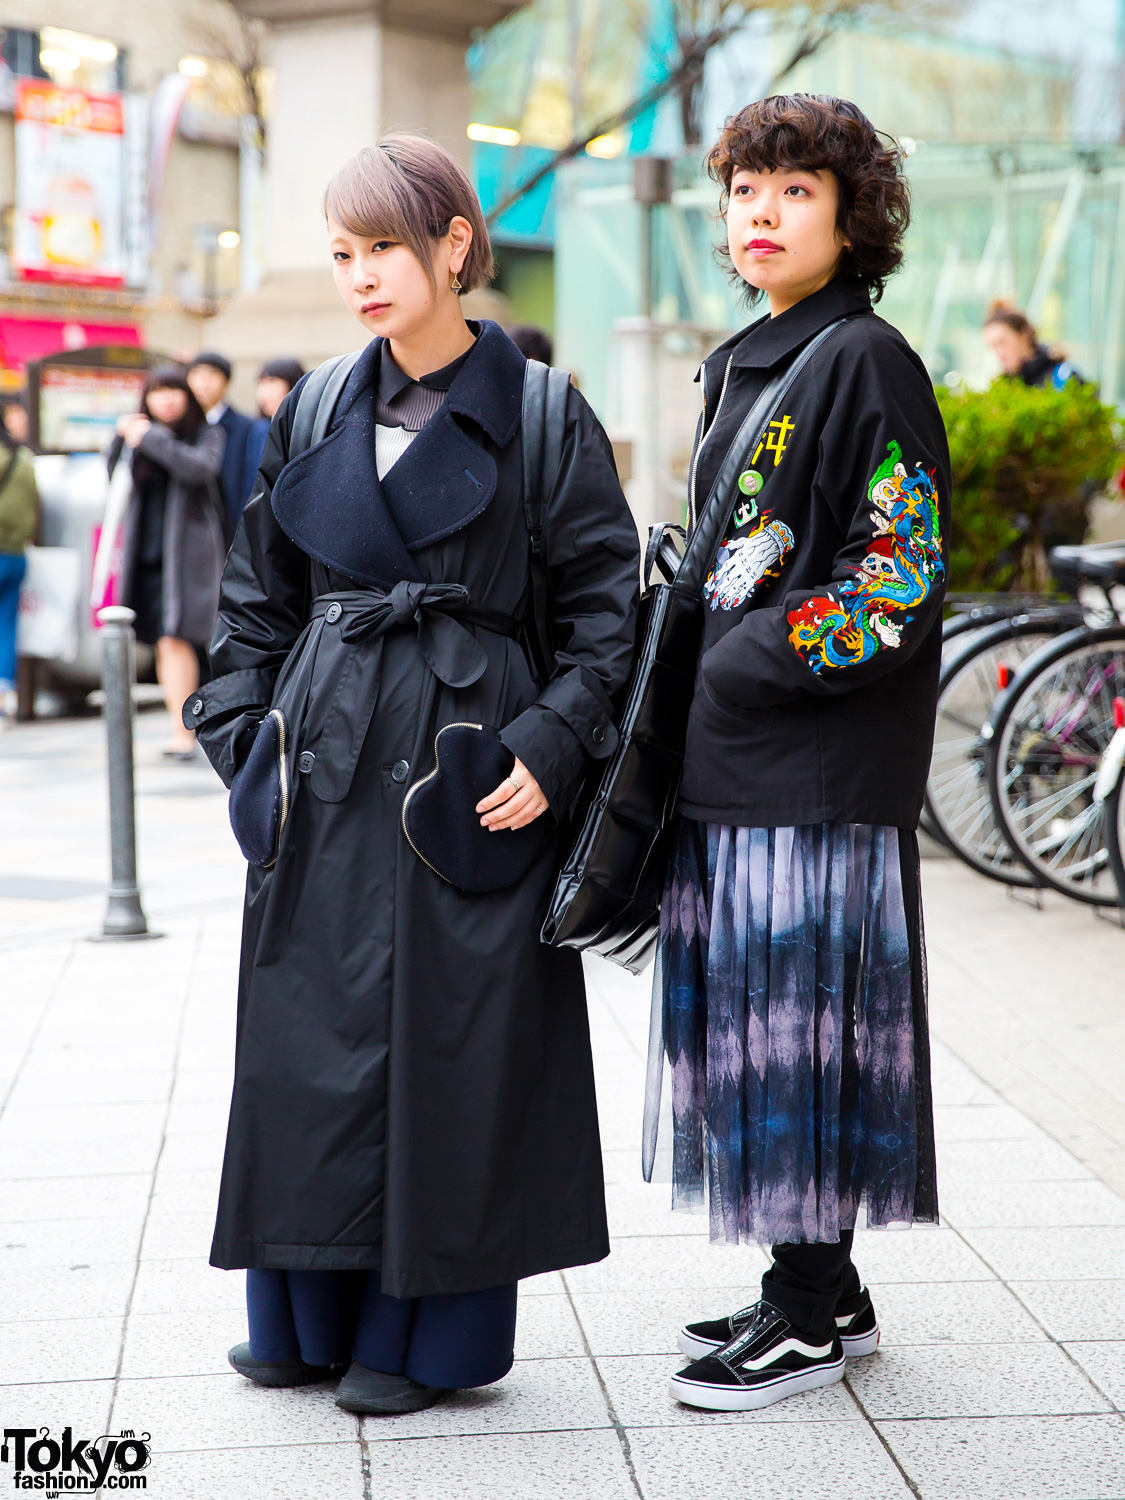 Japanese Dark Streetwear in Harajuku w/ Tsumori Chisato Trench Coat, Ahcahcum Backpack, Kidill Patch Jacket & Black Comme des Garcons Geometric Tote